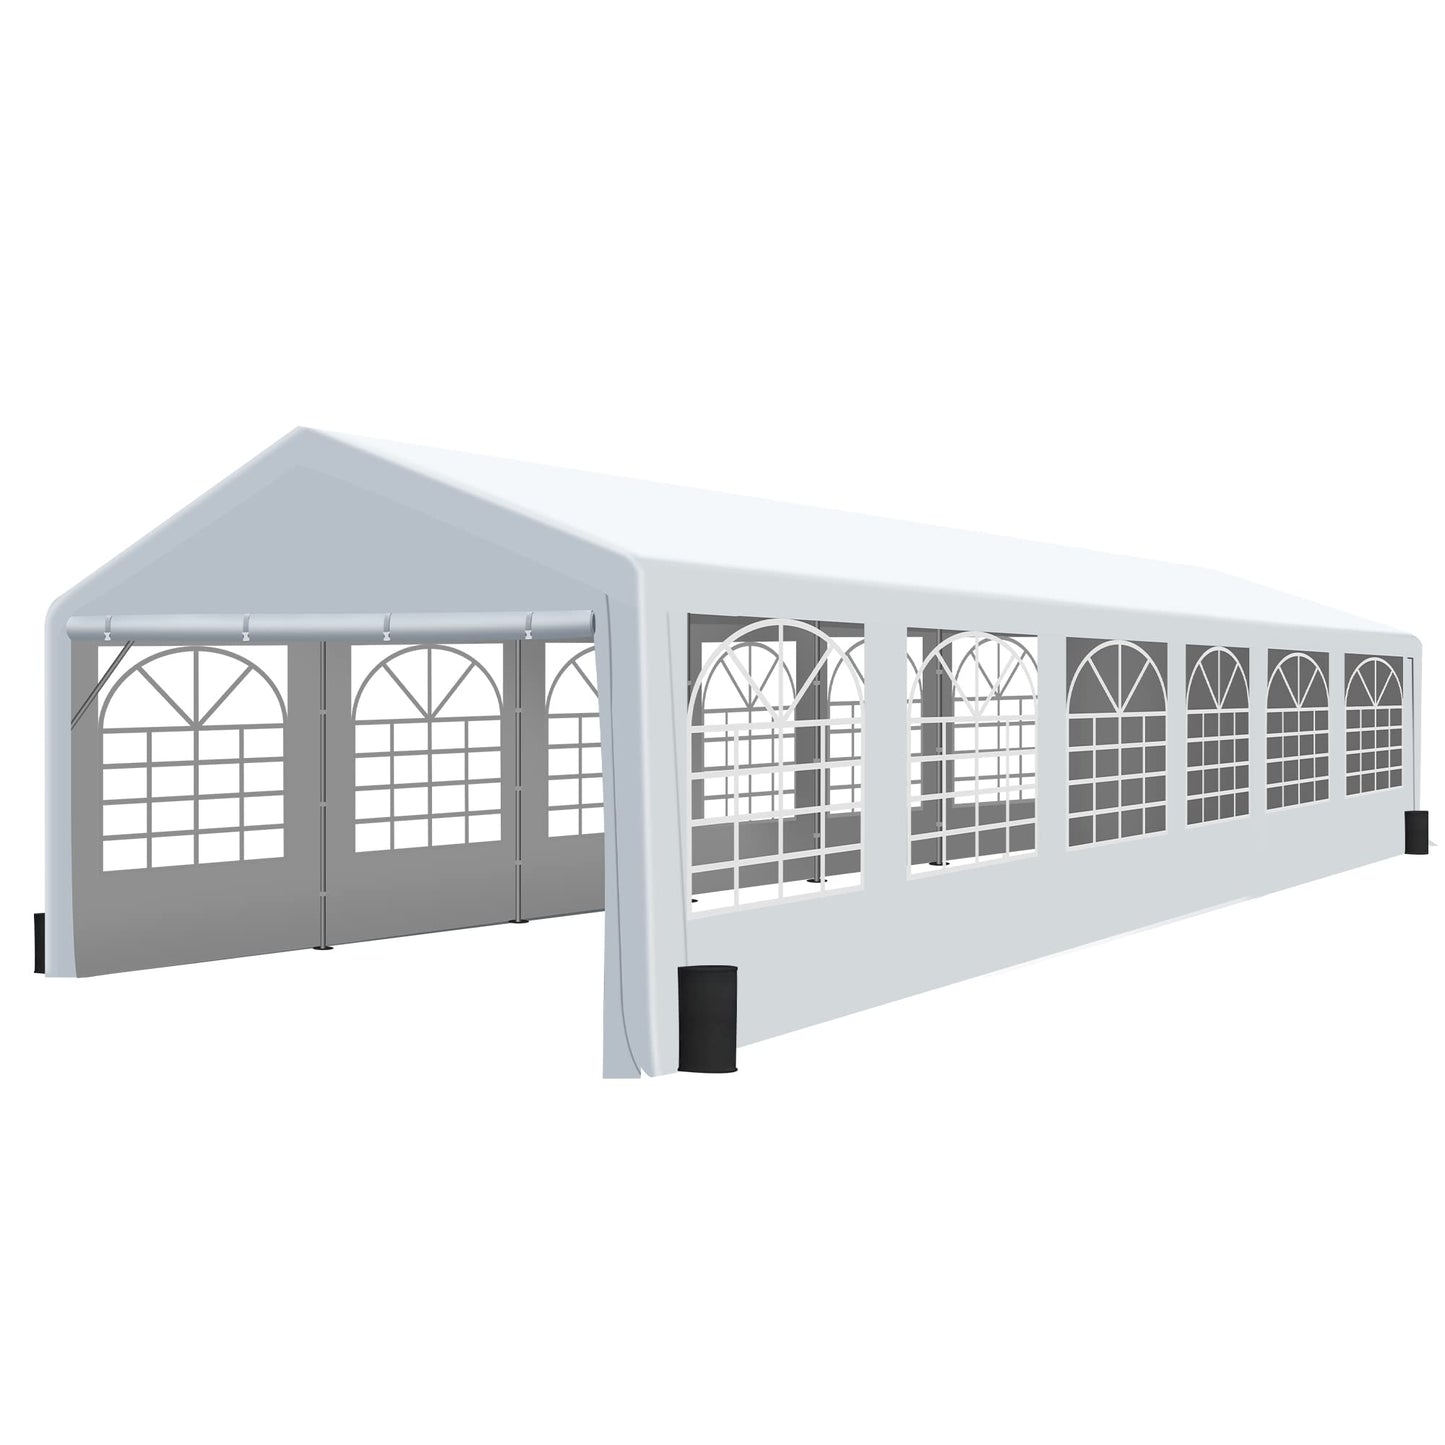 GARTOO 20' x 40' Large Heavy Duty Carport - Outdoor Wedding Party Tent Gazebo with 4 Sand Bags, Storage Shelter Canopy for Car, Boat, Truck, Auto, Motorcycle 20' x 40'